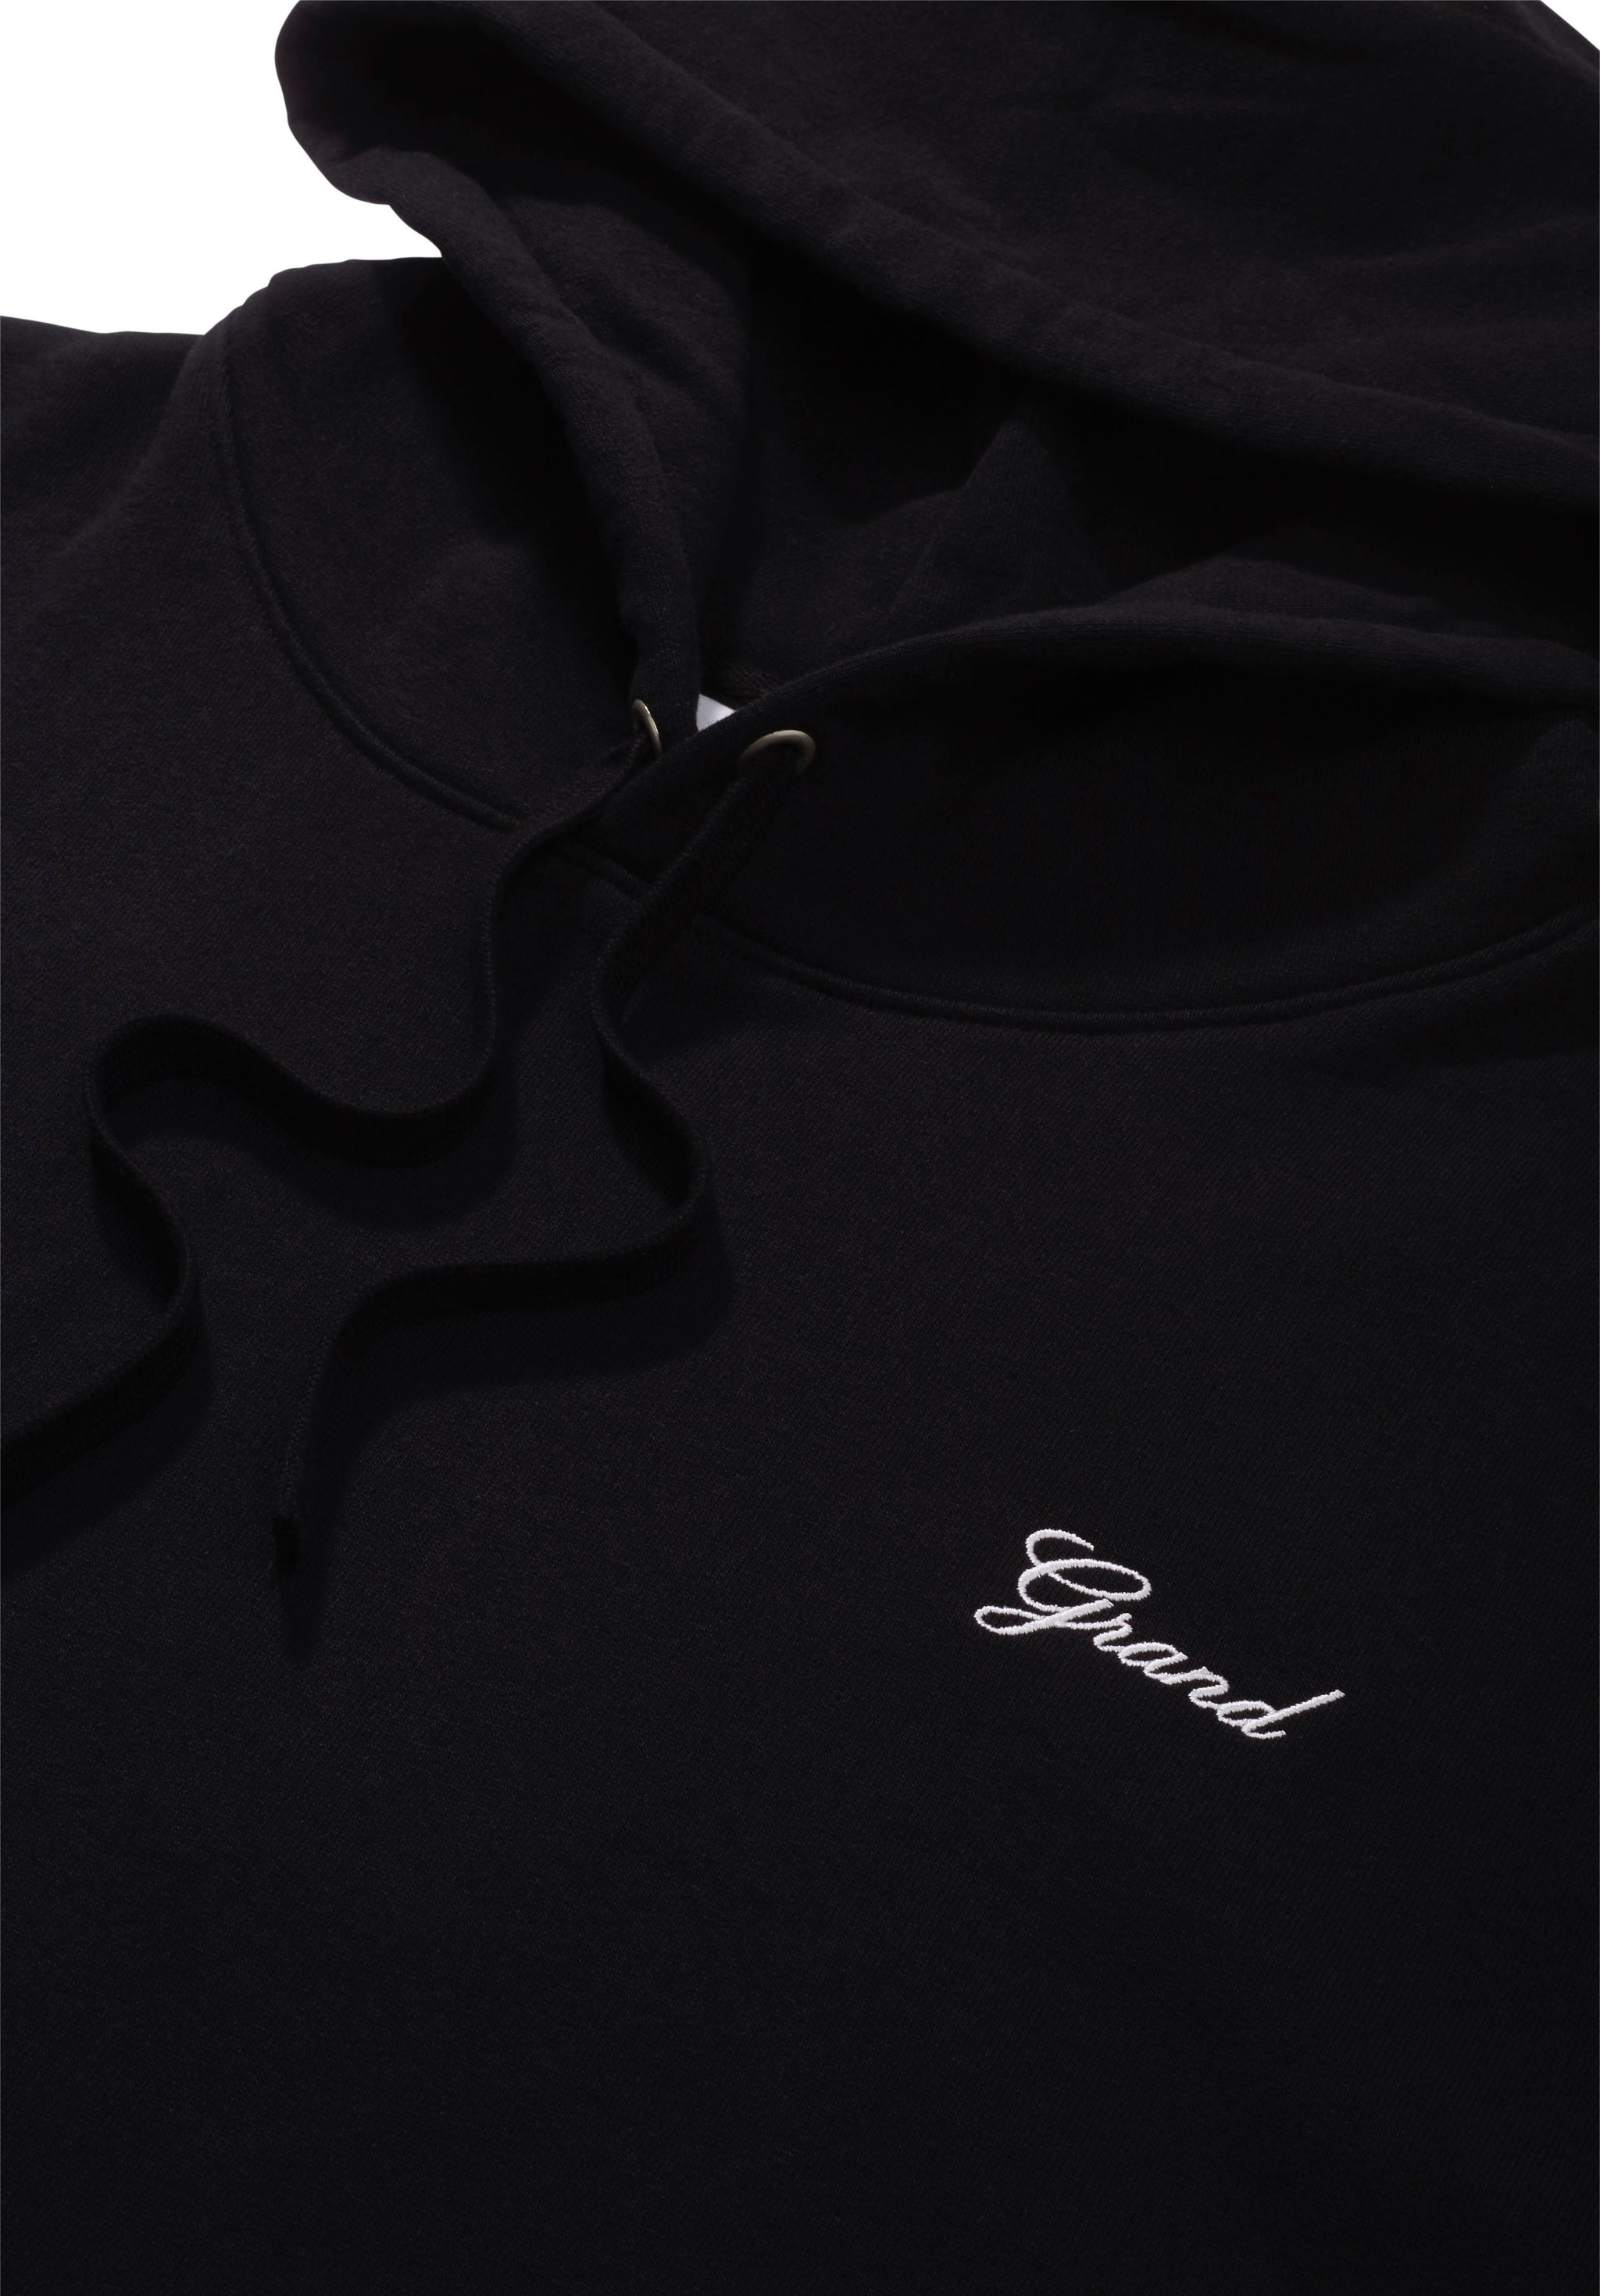 GRAND COLLECTION - Script Hoodie "Black"